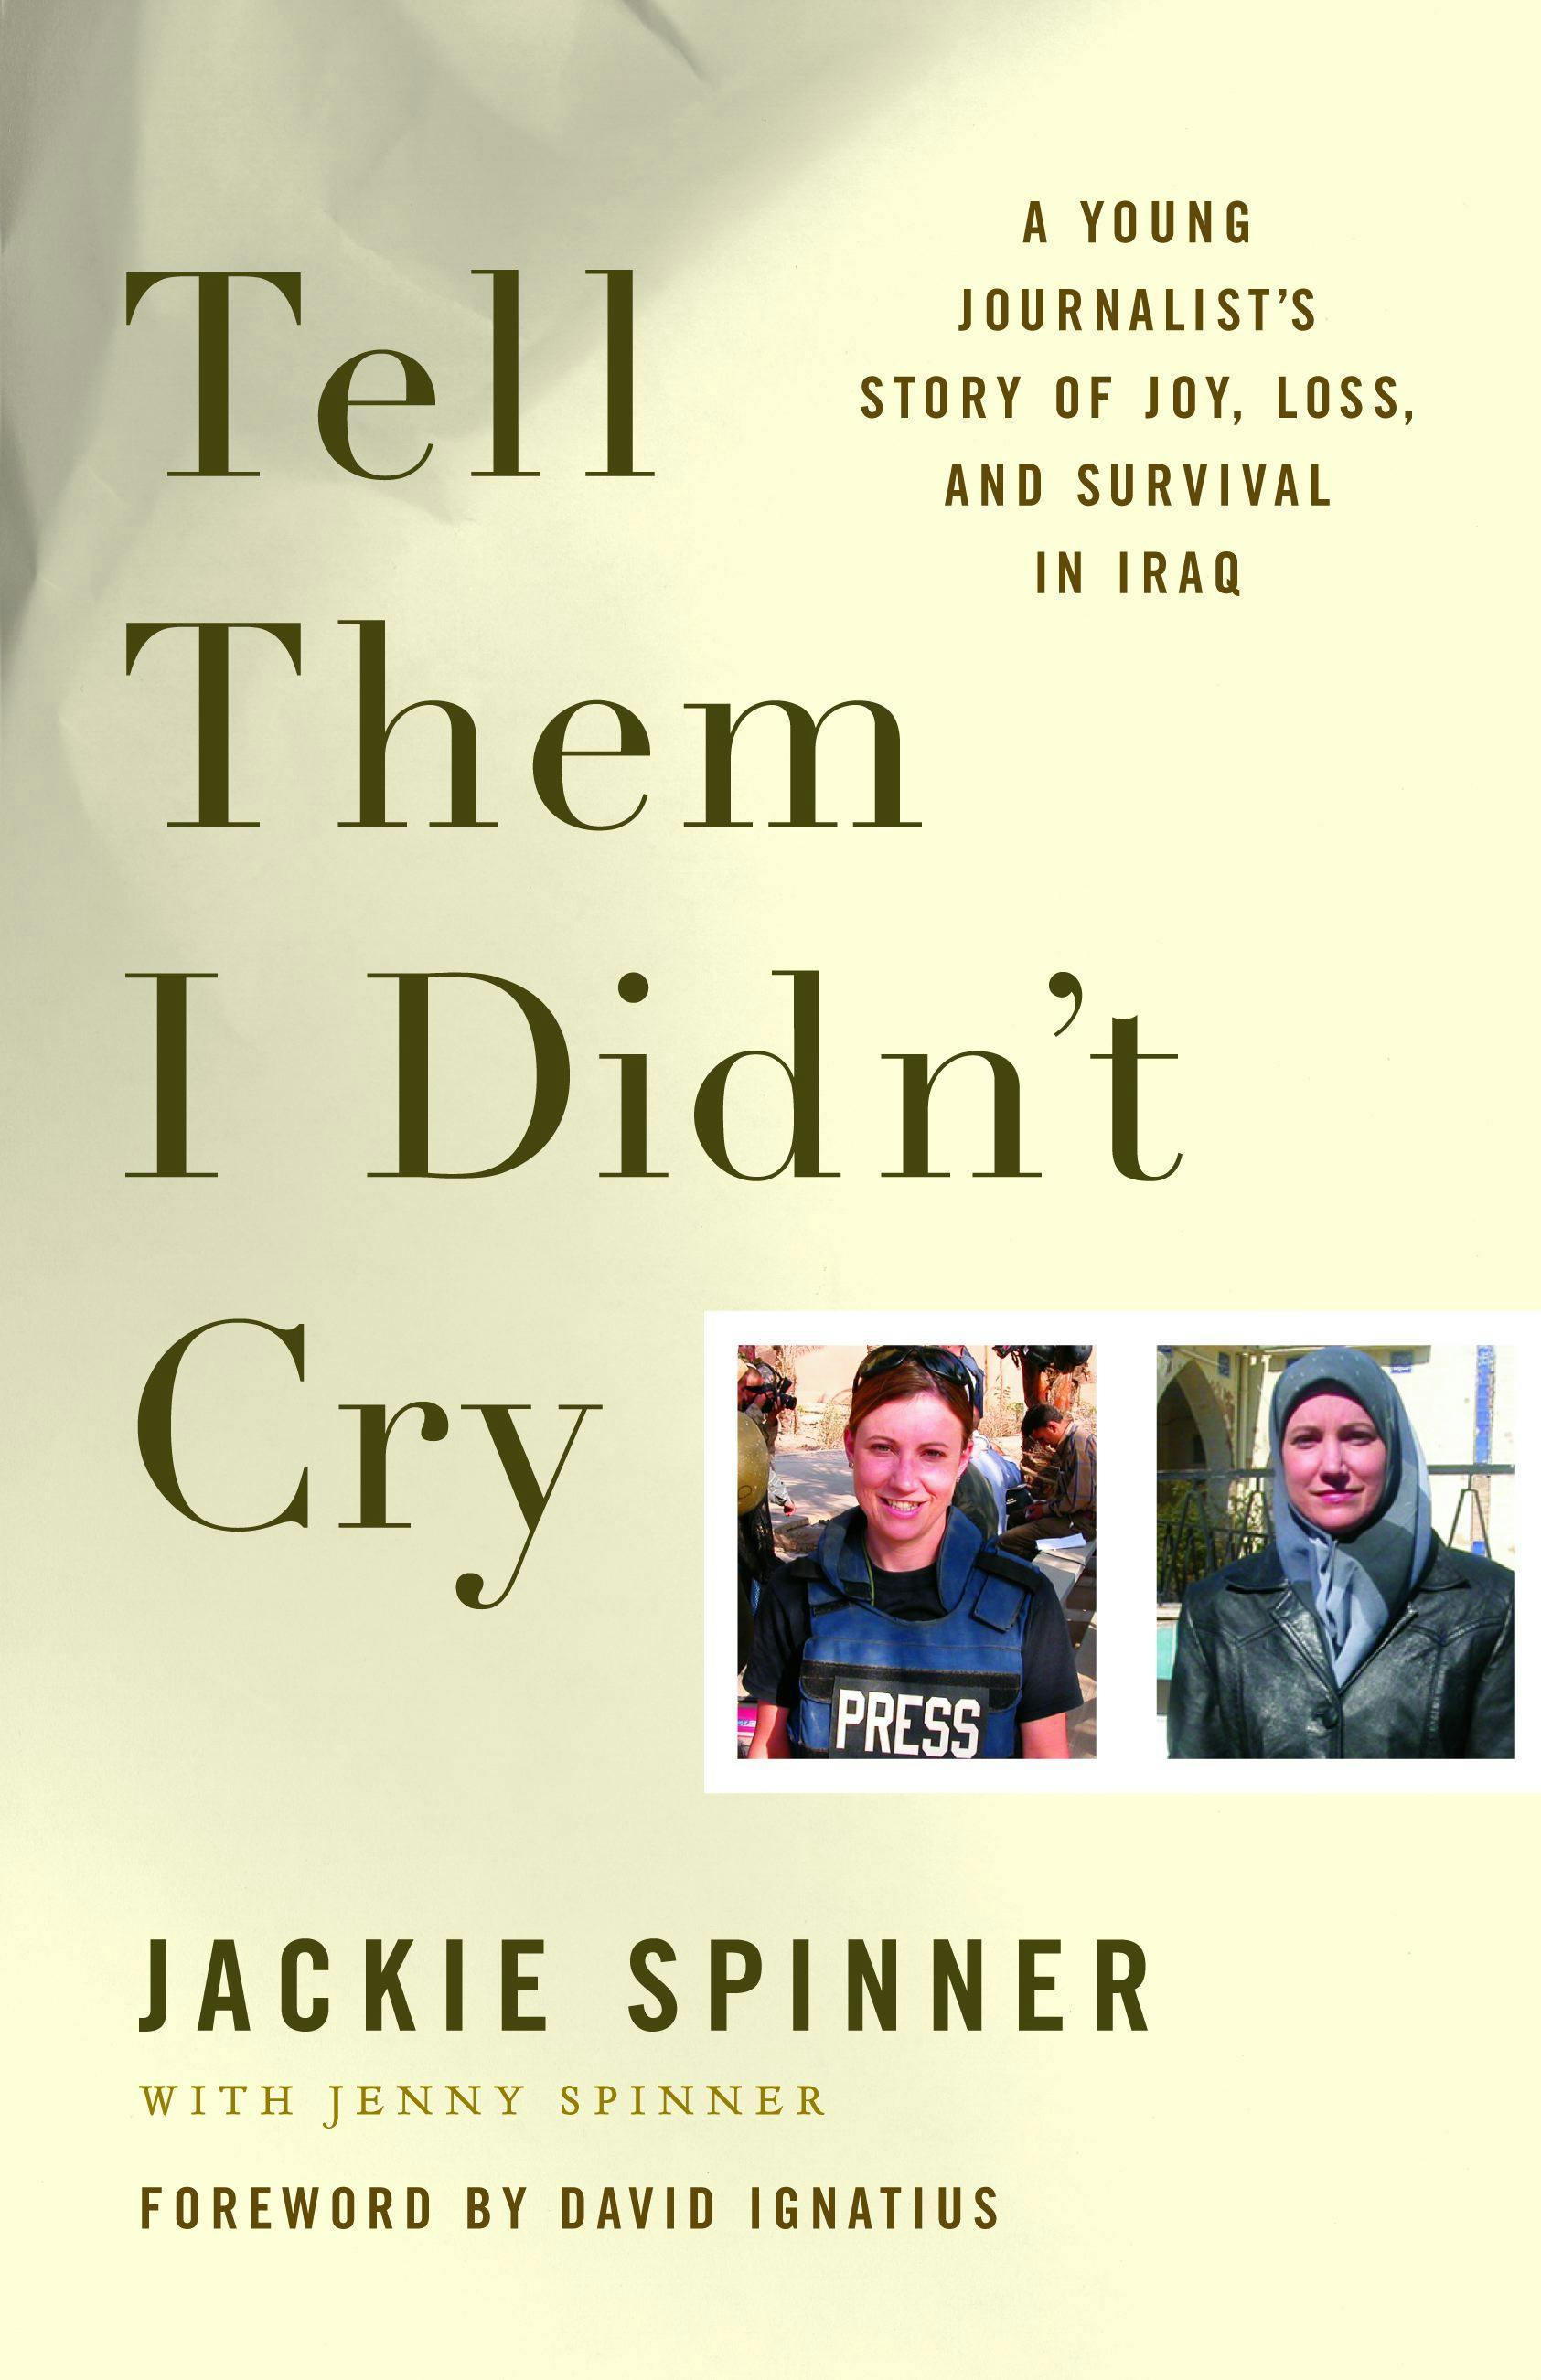 Tell Them I Didn't Cry: A Young Journalist's Story of Joy, Loss, and Survival in Iraq - Jackie Spinner